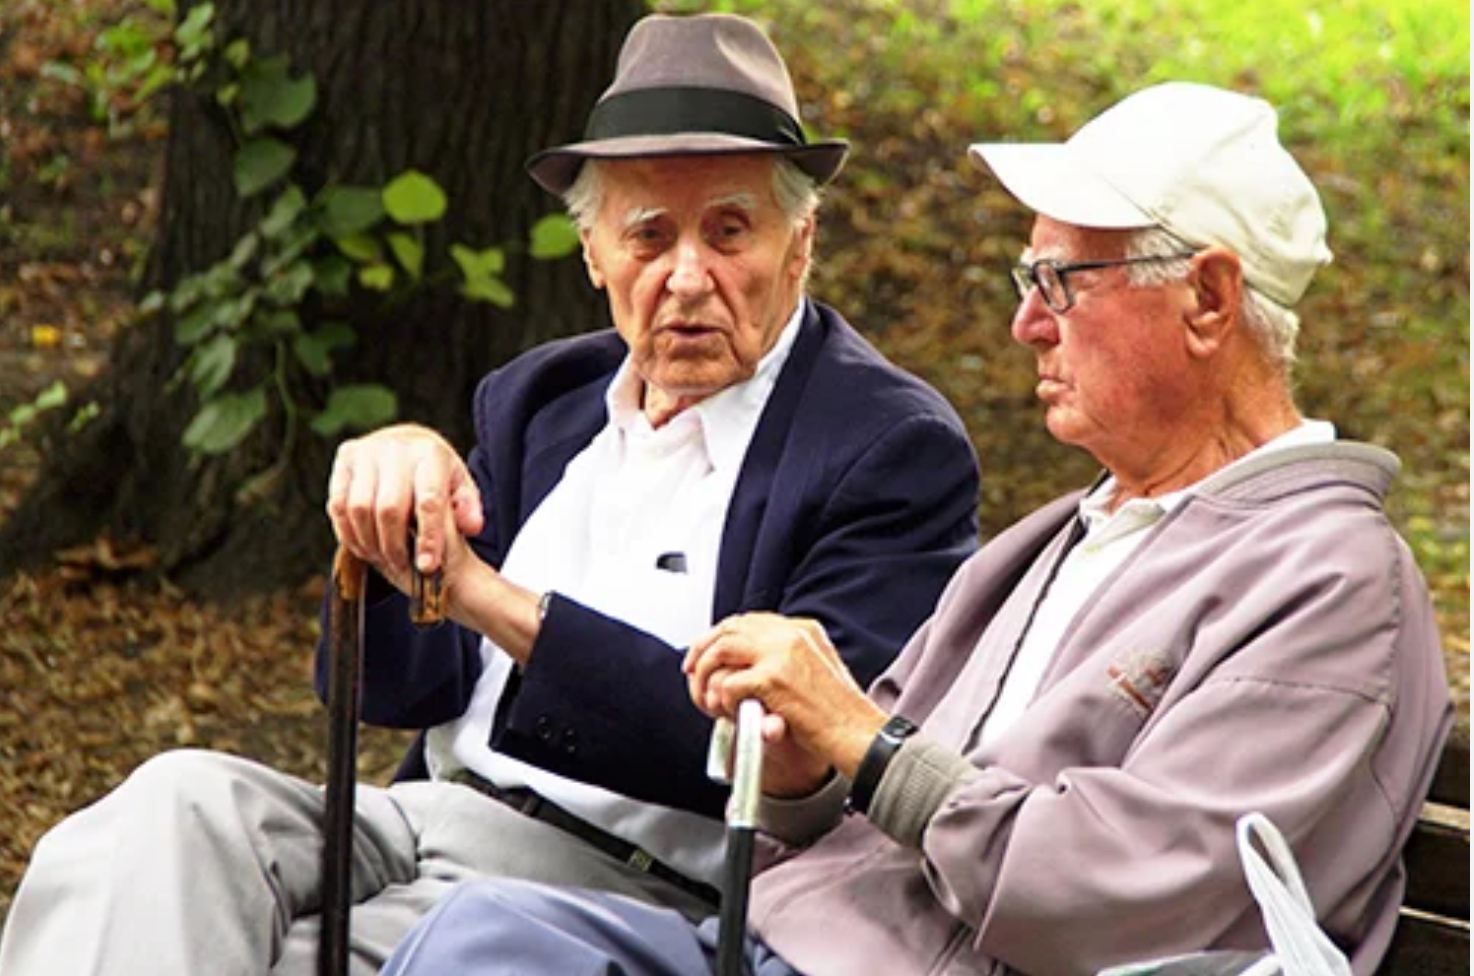 Sons of Thunder image of men talking on a park bench